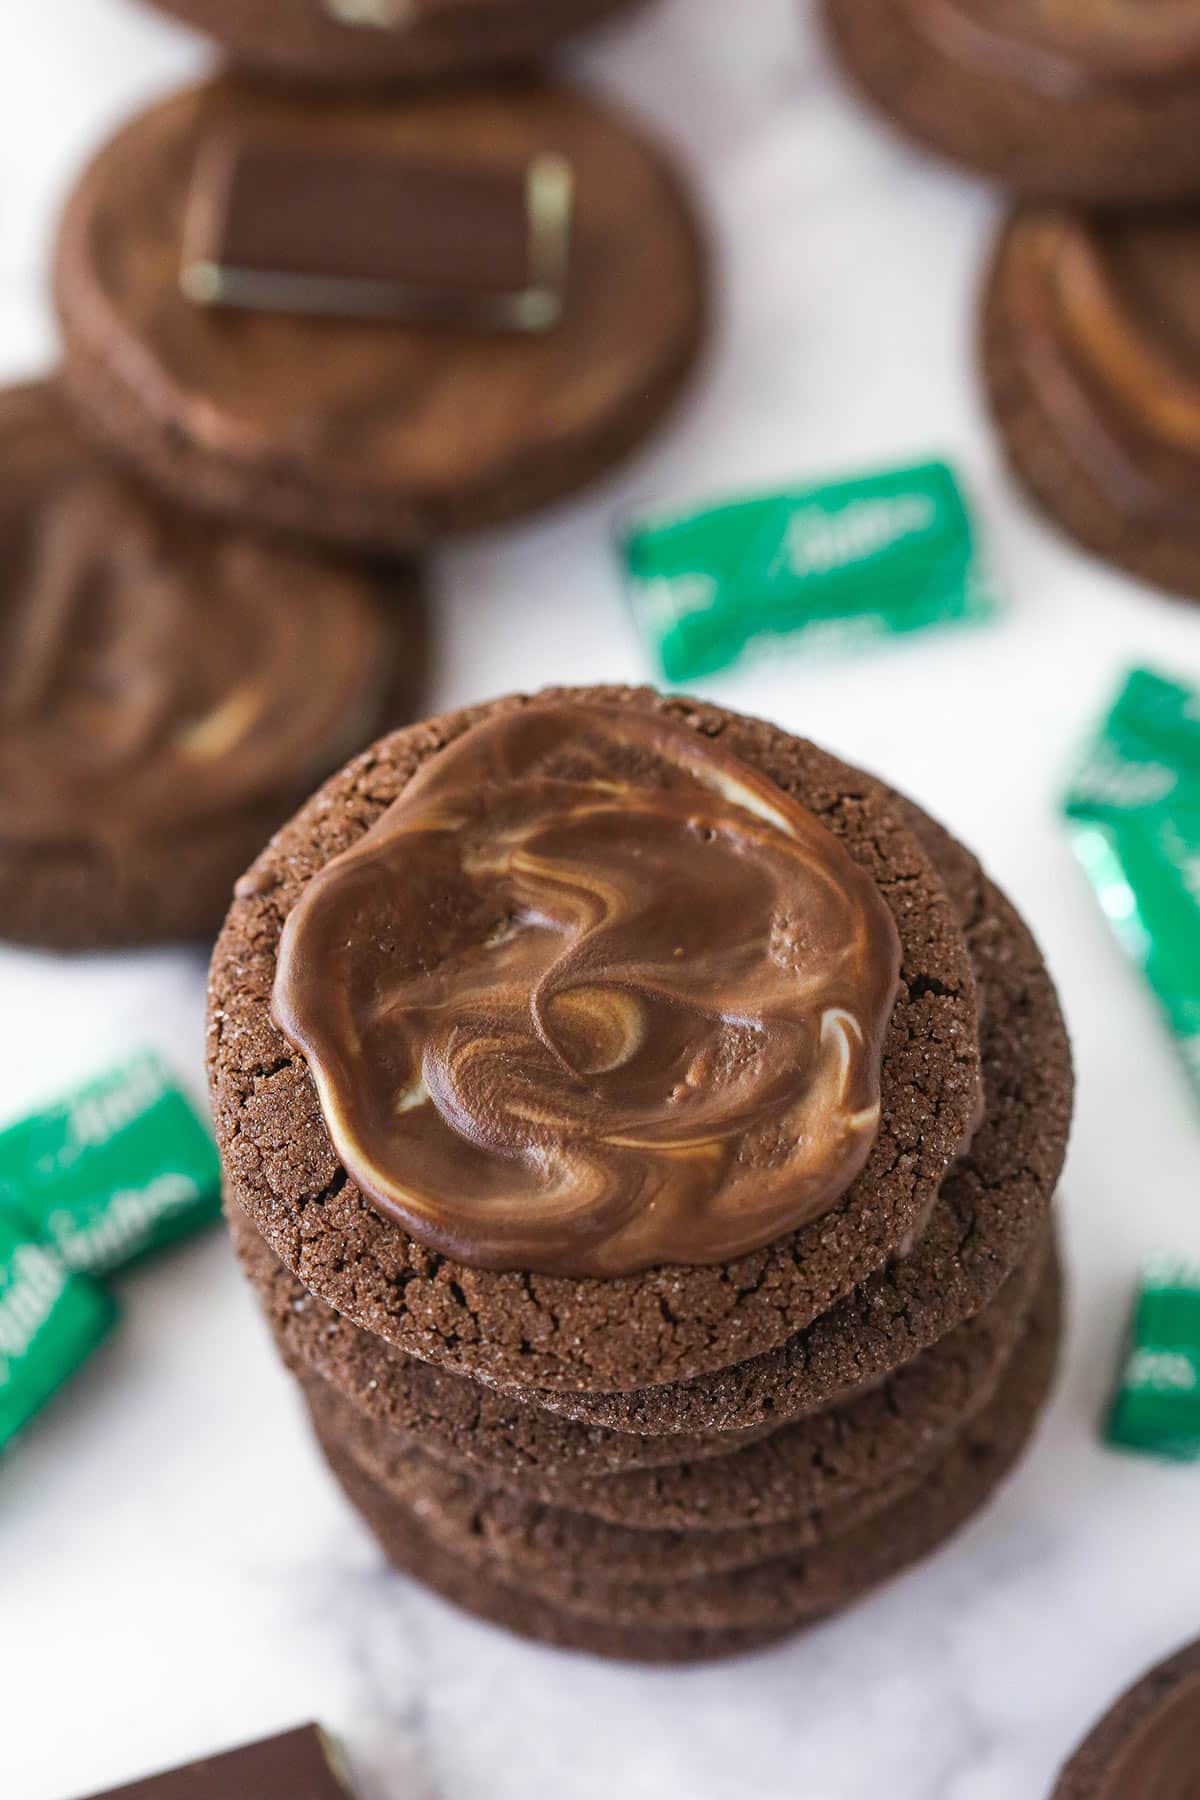 Overhead image of a stack of Andes mint cookies surrounded by Andes mints.